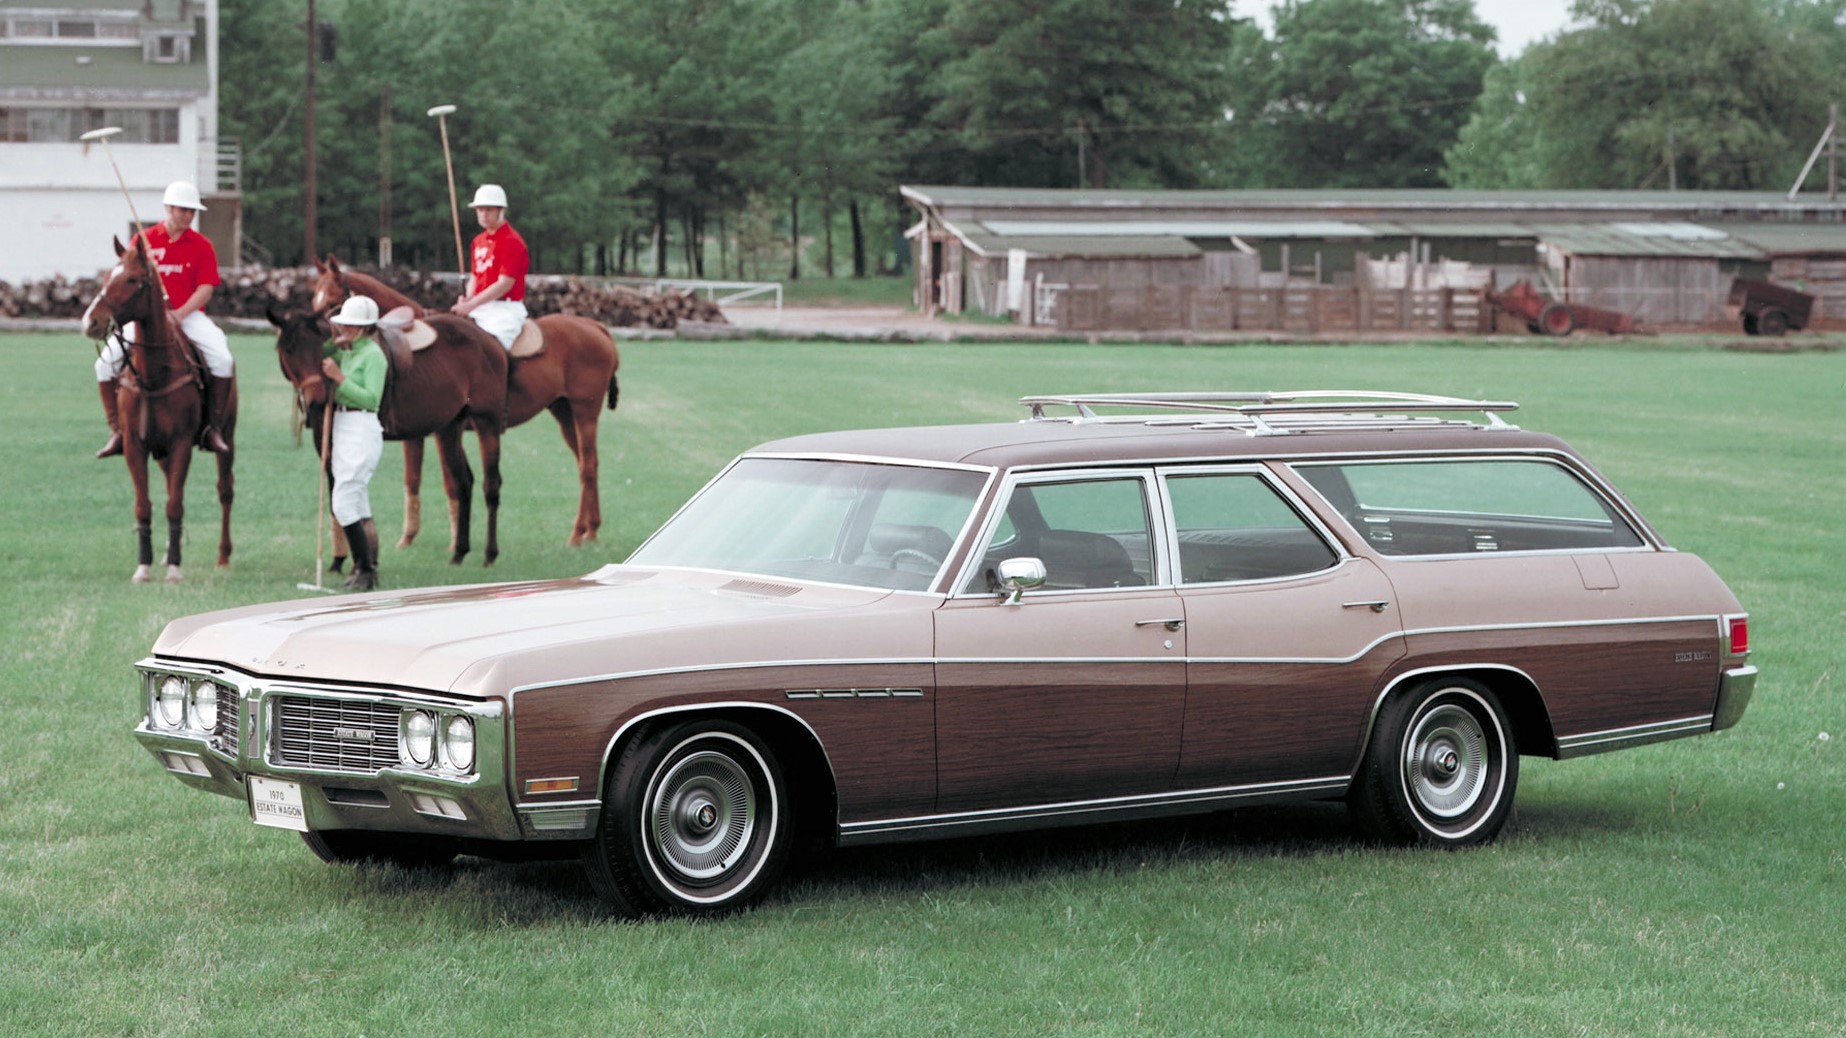 American Way at its Finest: The Best 1970s Station Wagons